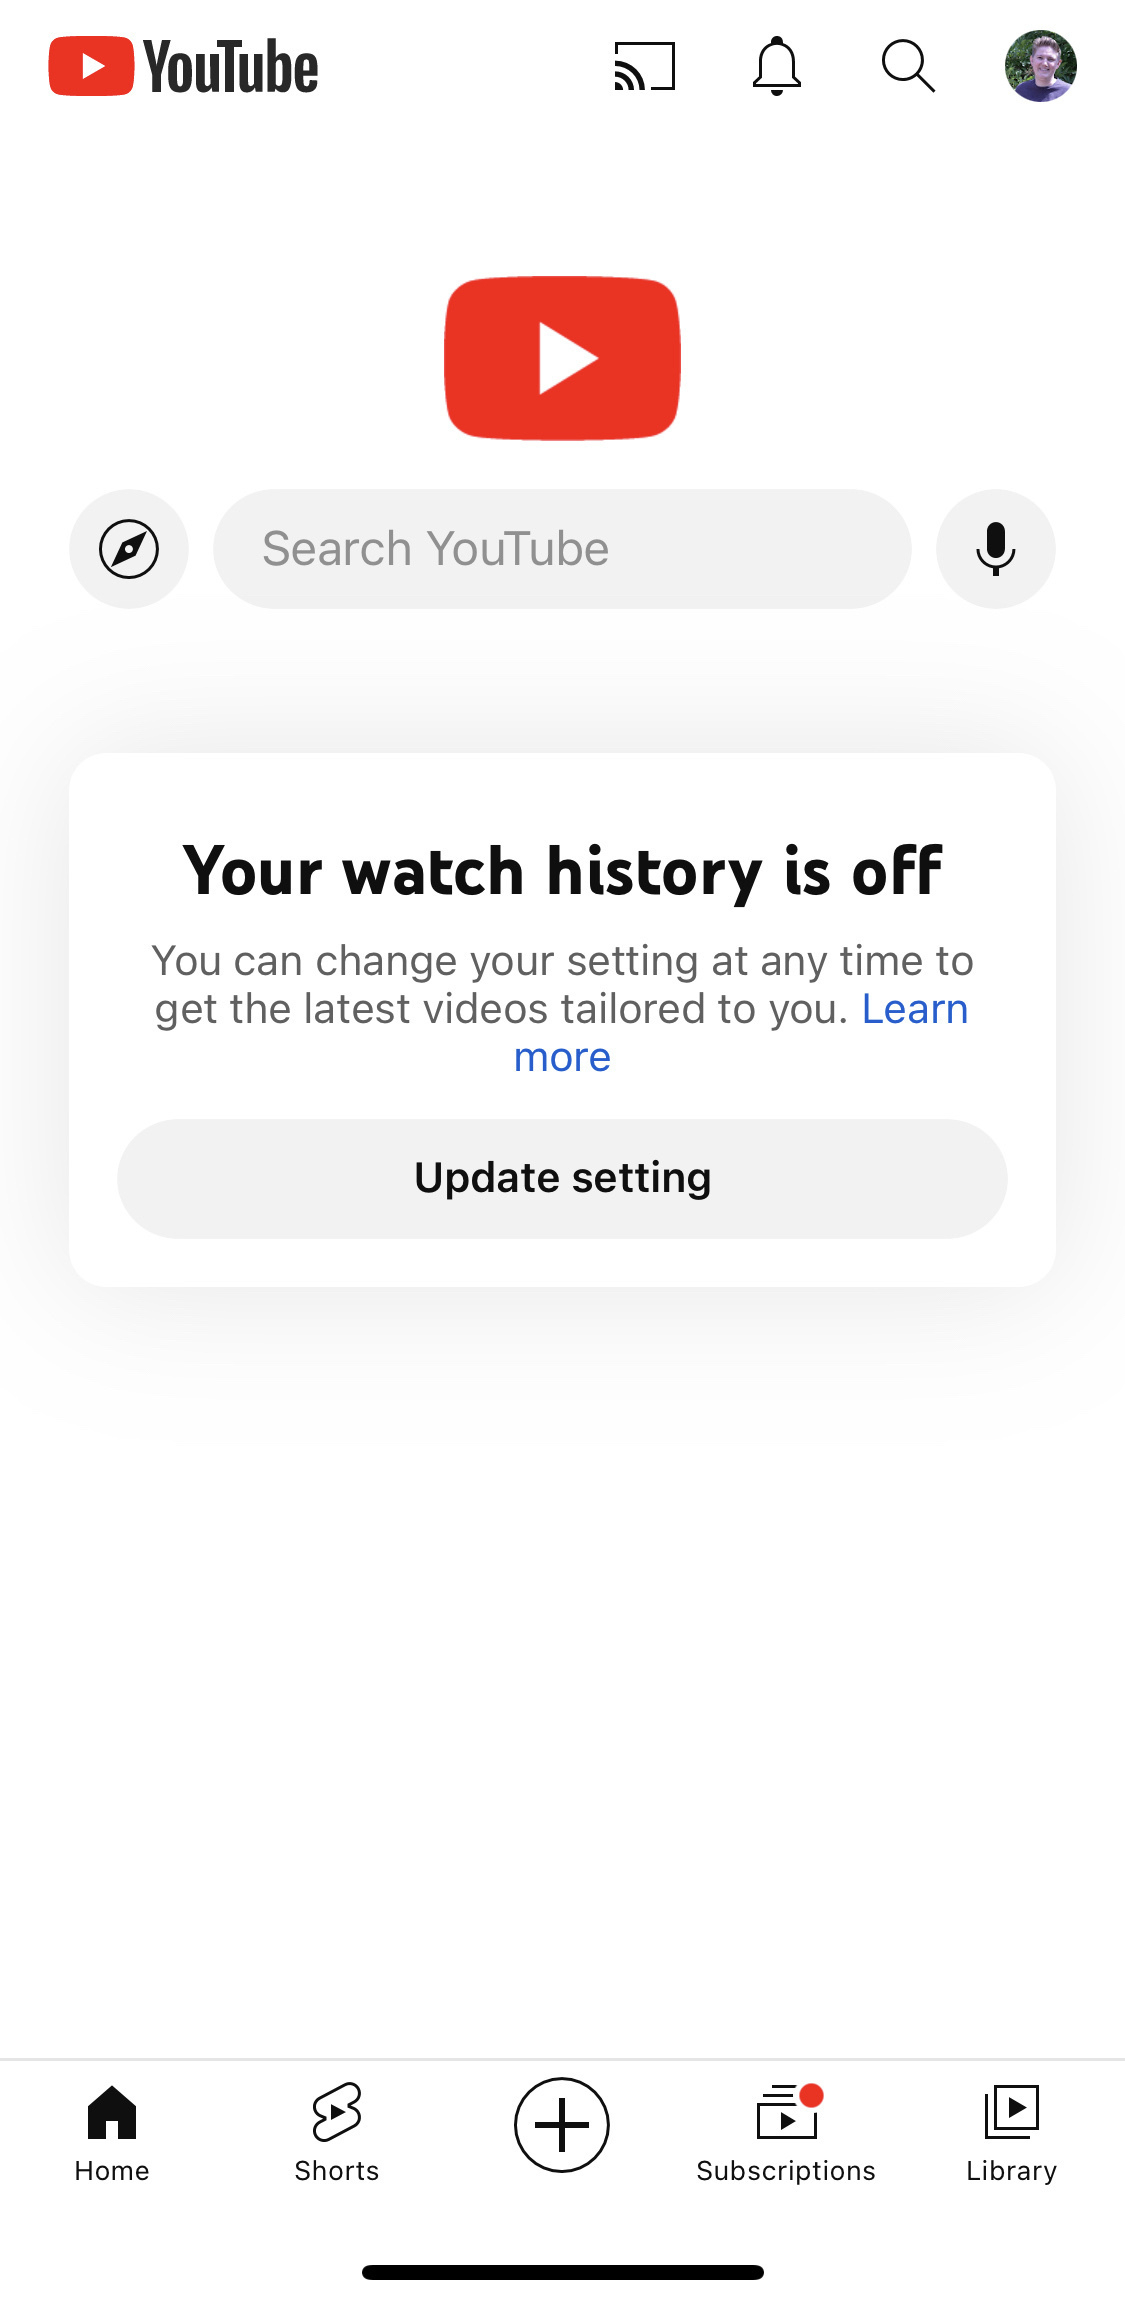 Screenshot of YouTube app with a completely white screen. An alert box reads “Your watch history is off. You can change your setting at any time to get the latest videos tailored to you.” The call to action is a button to update settings.